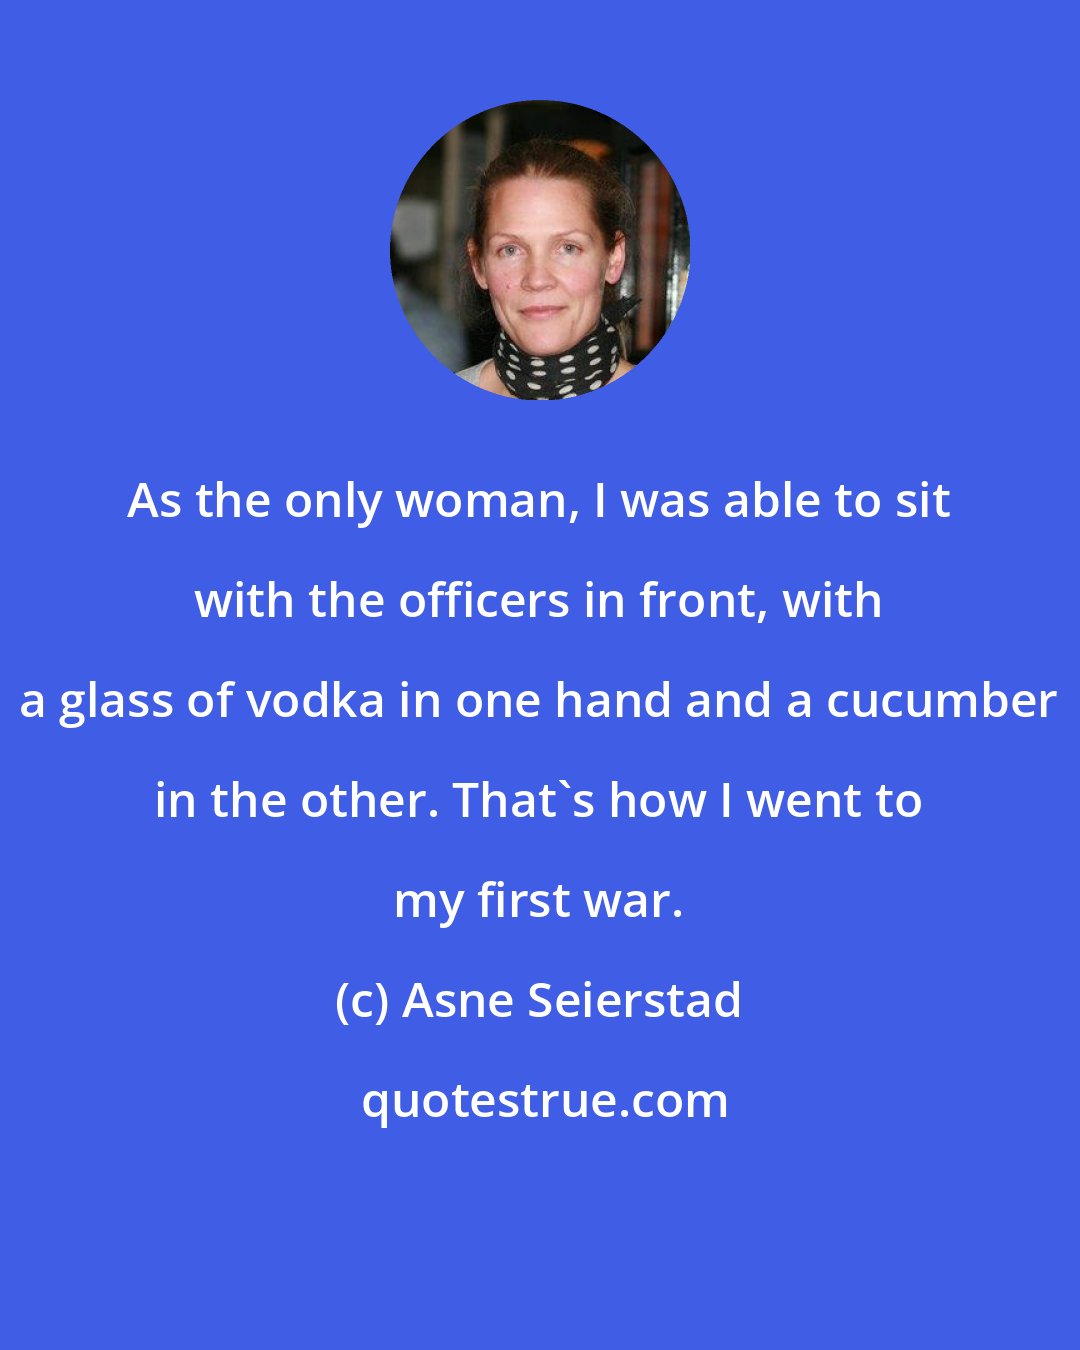 Asne Seierstad: As the only woman, I was able to sit with the officers in front, with a glass of vodka in one hand and a cucumber in the other. That's how I went to my first war.